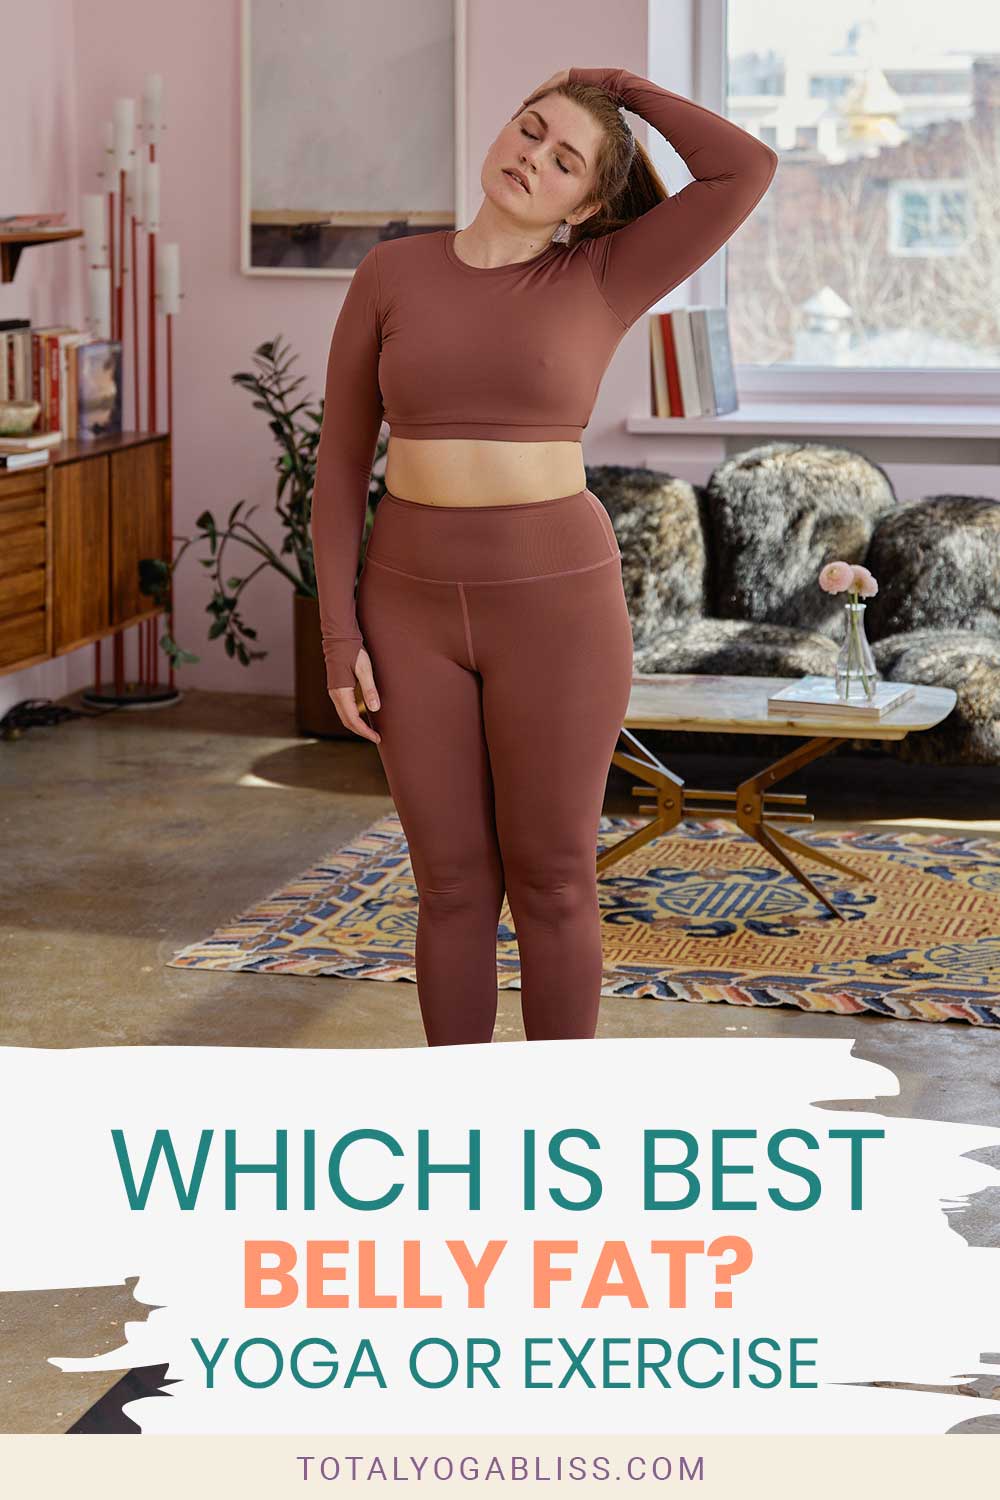 Woman in brown activewear doing yoga indoor - Which Is Best For Belly Fat? Yoga Or Exercise